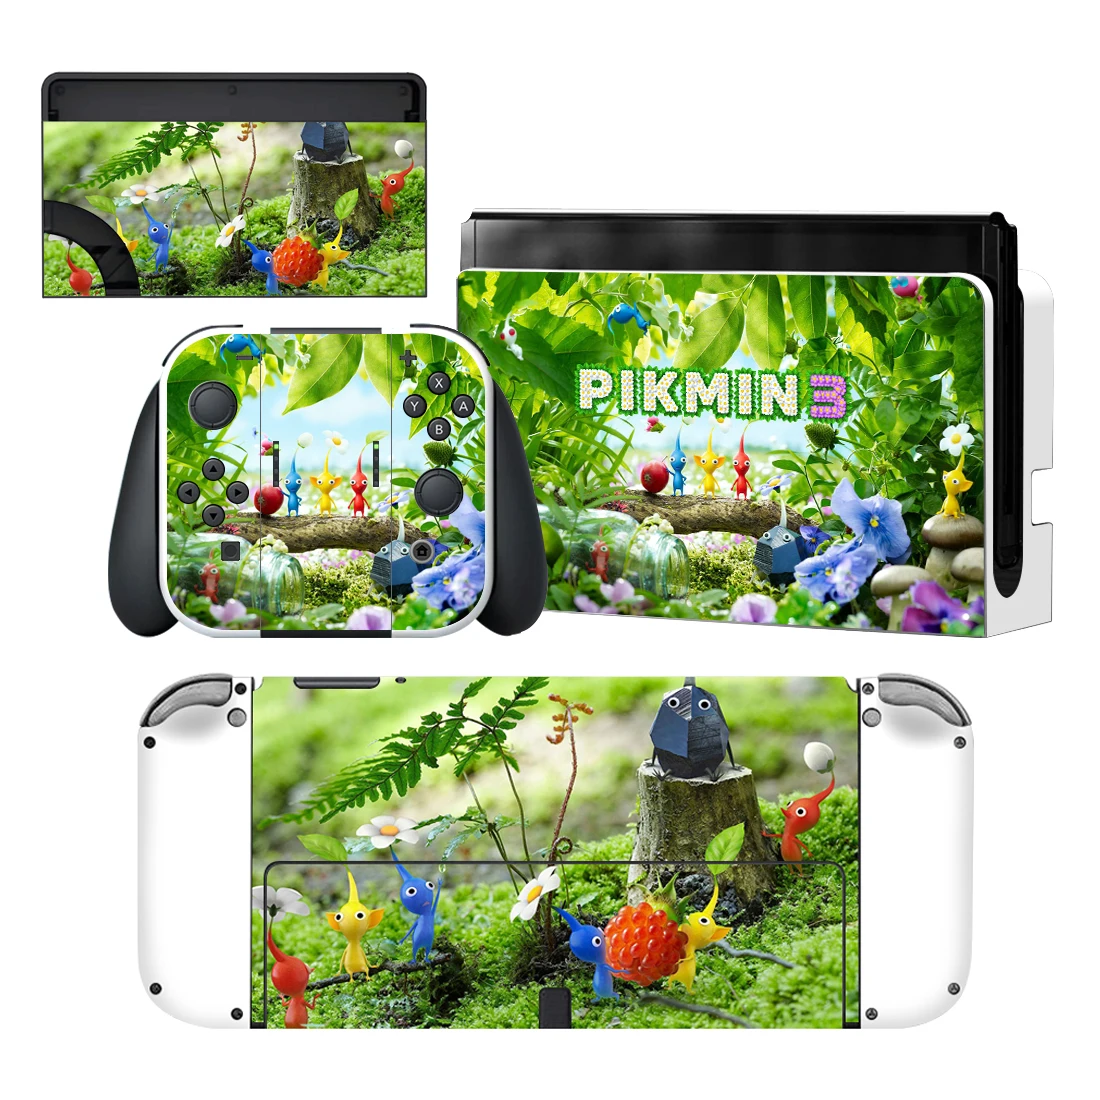 

Pikmin 3 Nintendoswitch Skin Cover Sticker Decal for Nintendo Switch OLED Console Joy-con Controller Dock Skin Vinyl